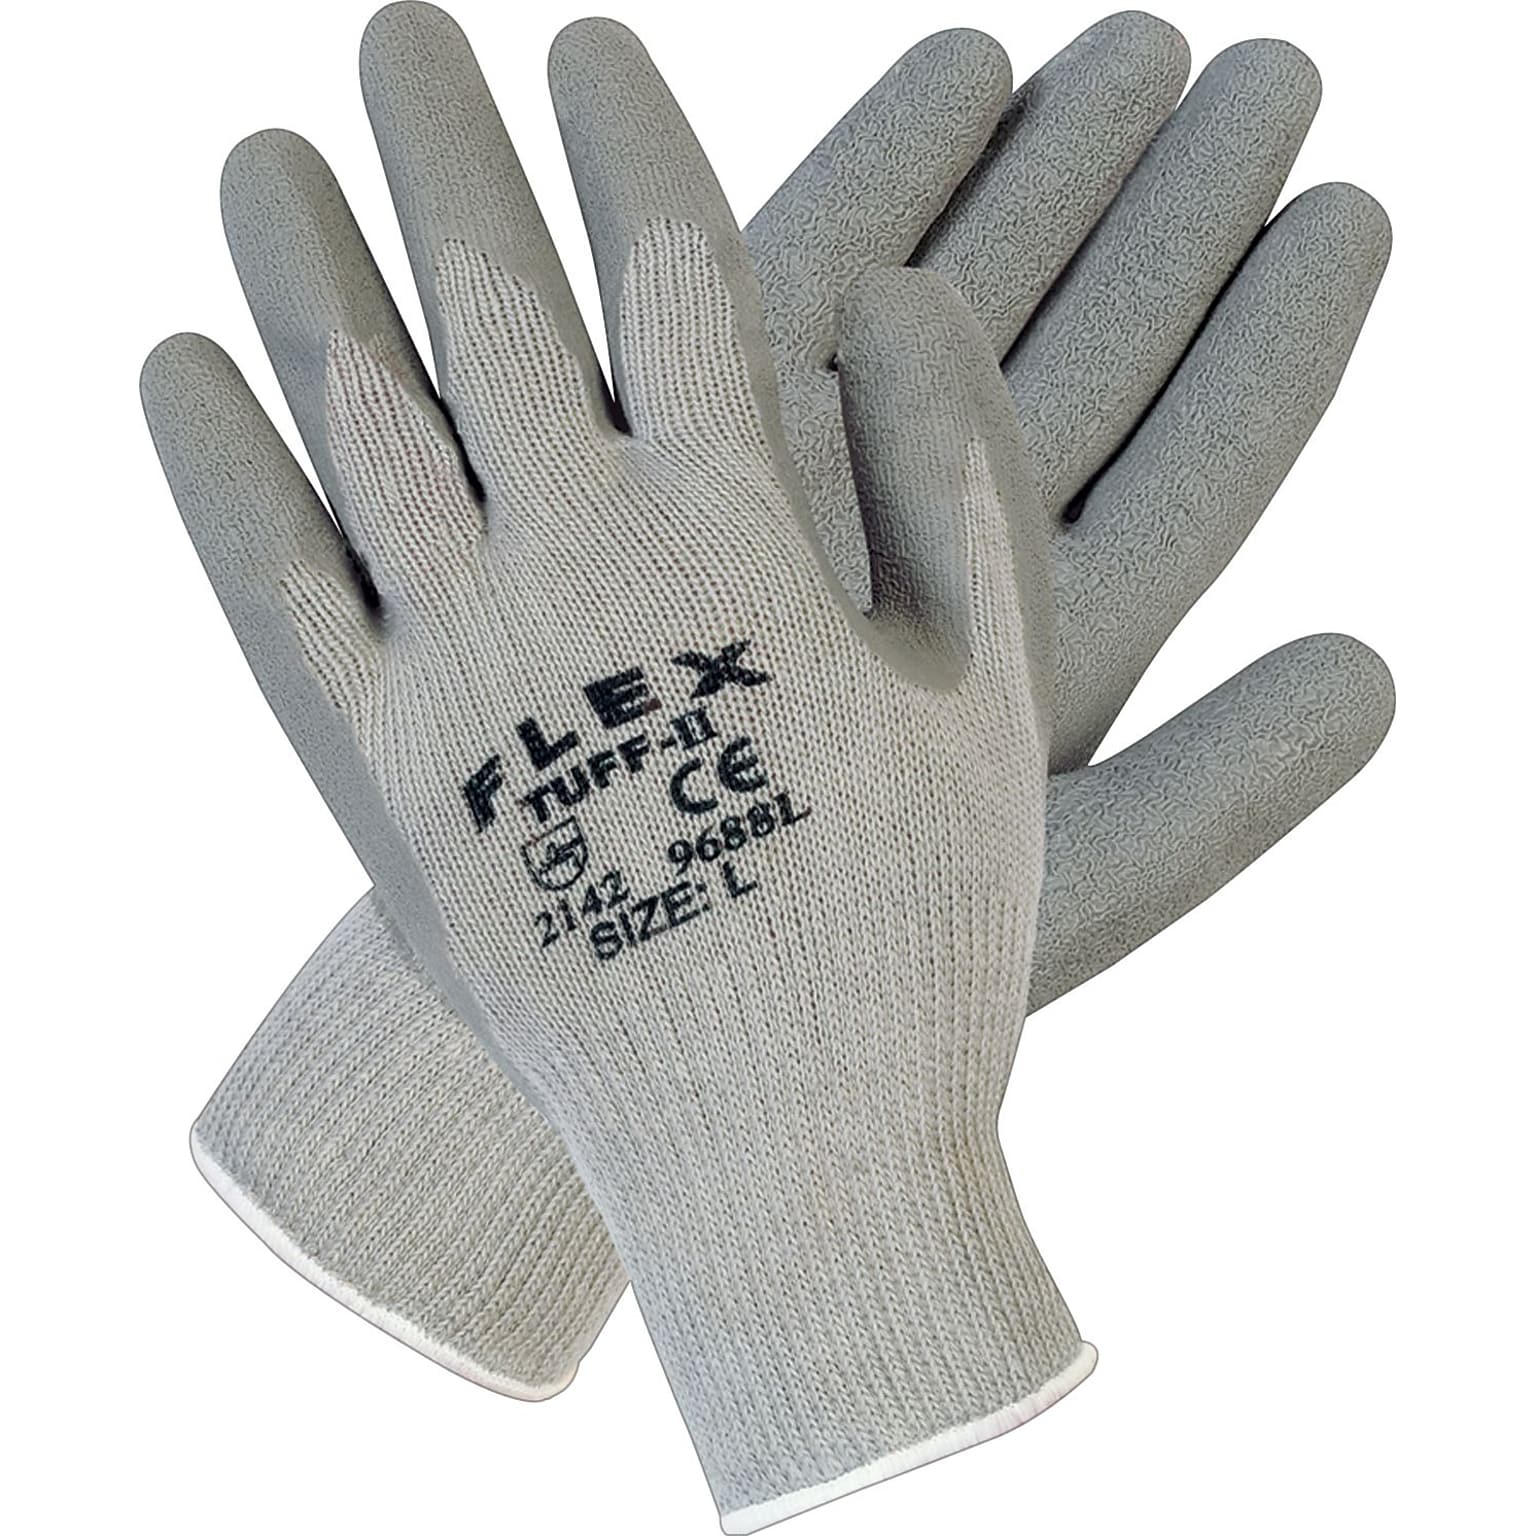 MCR Safety Memphis Flex Tuff II Palm and Fingertip Coated Gloves, Cotton Polyester Blend Shell, Small, Gray, 12/Pair (9688S)